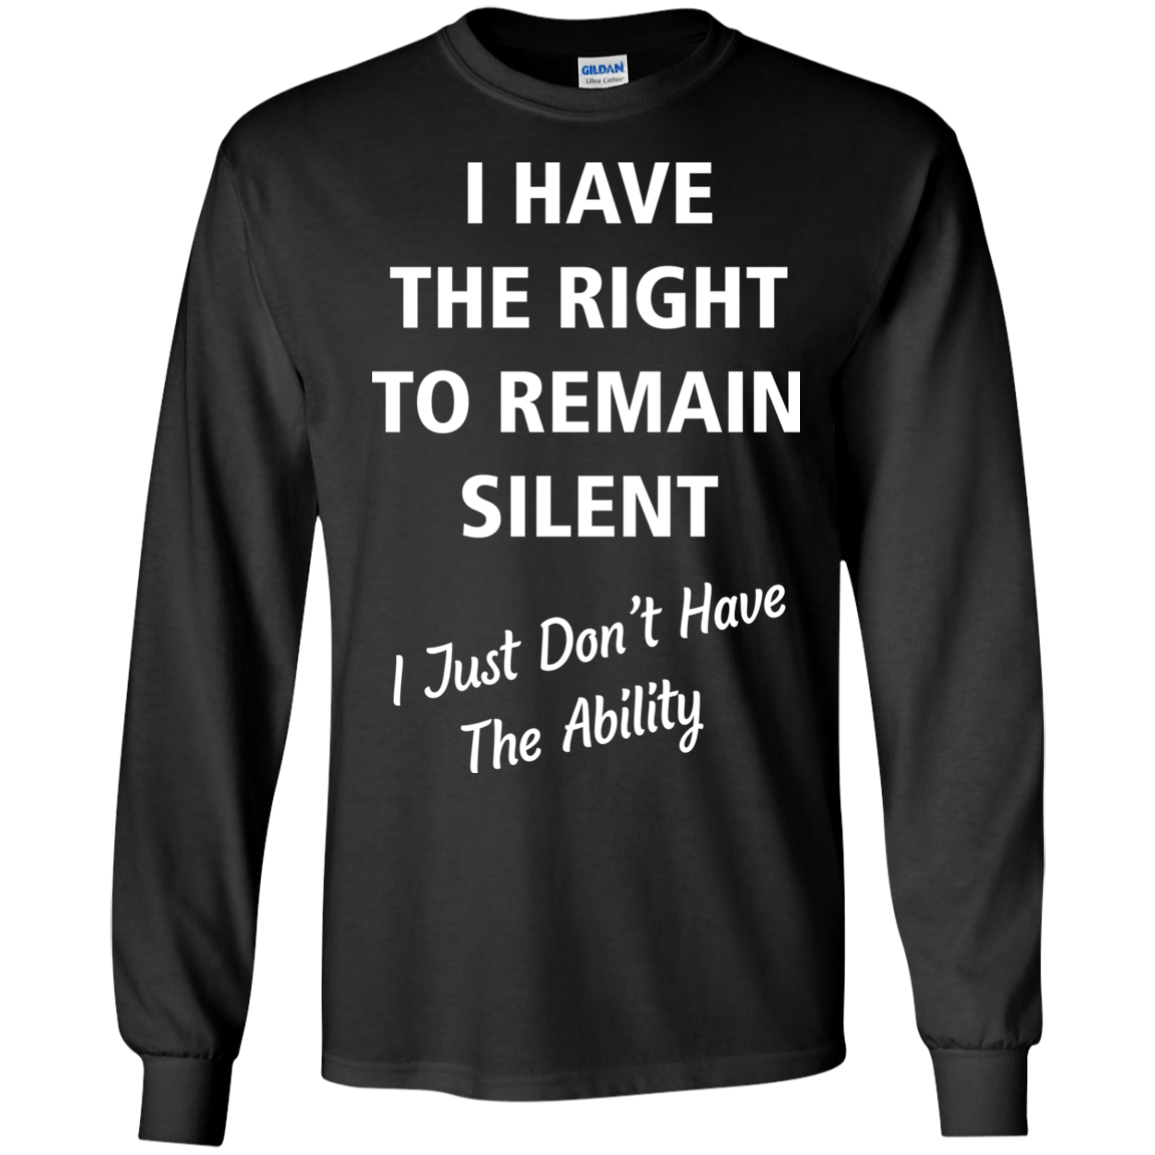 I Have Right To Remain Silent, Just Dont Have Ability tshirt, tank ...